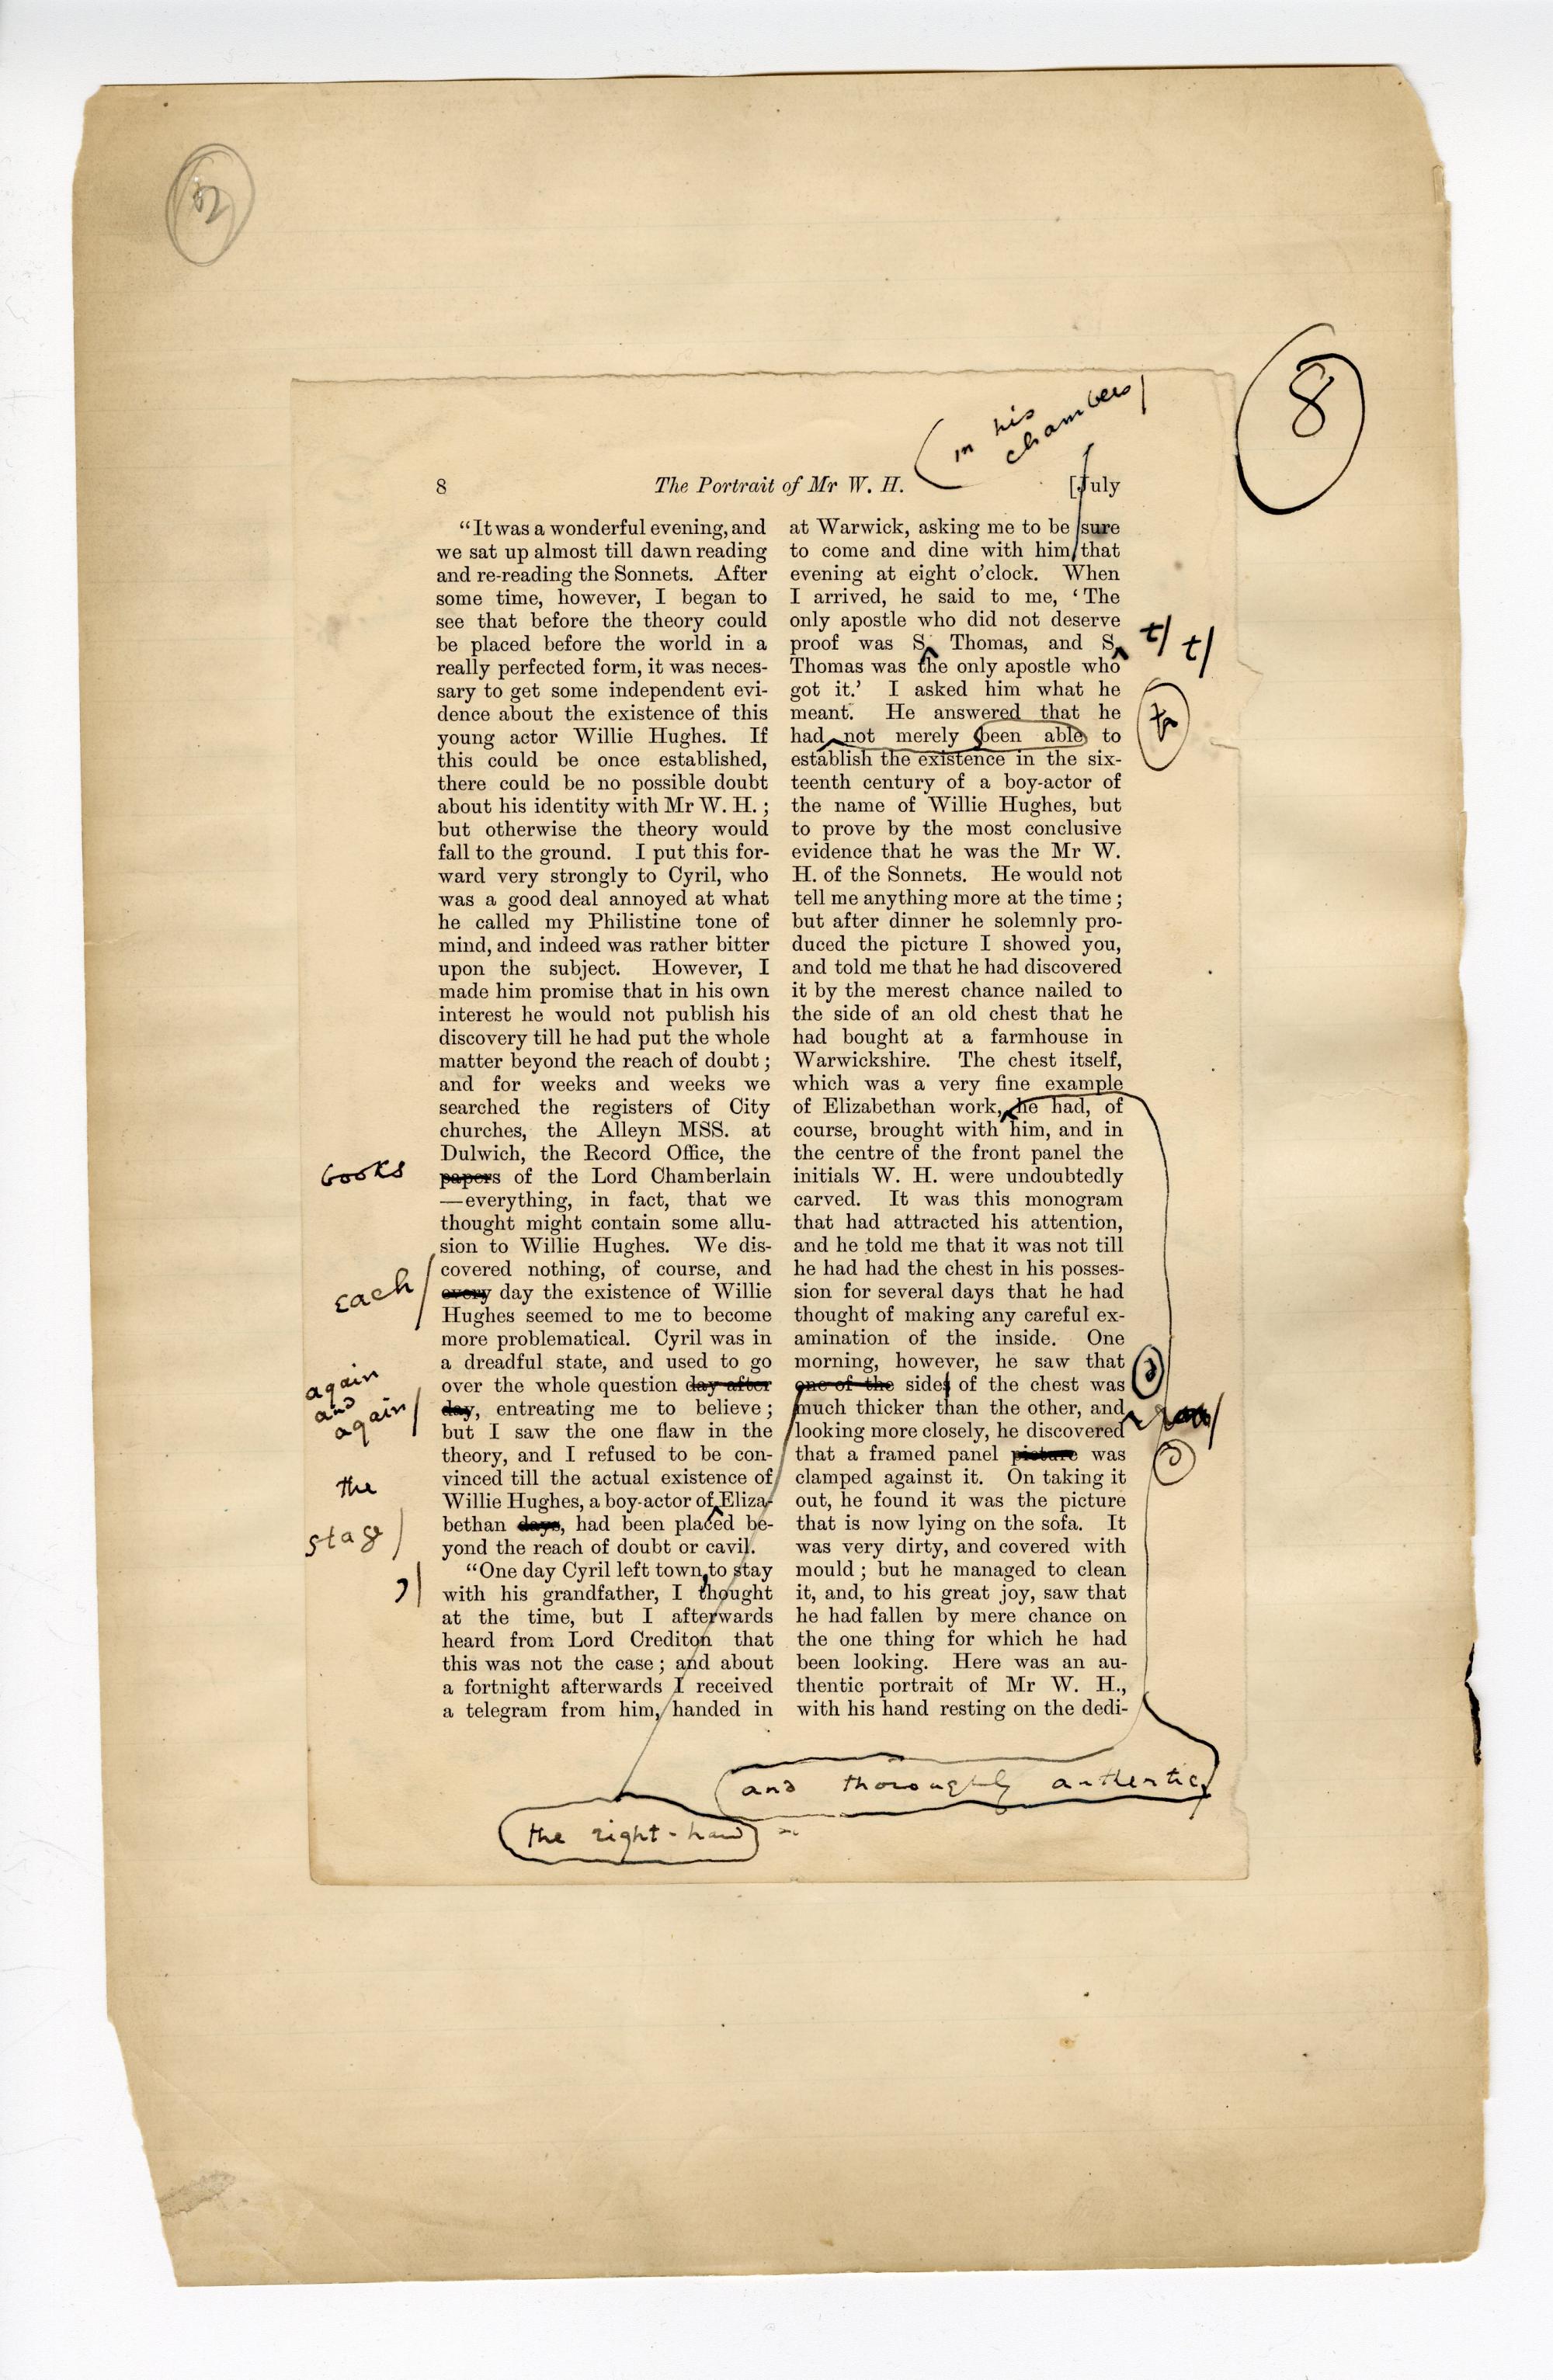 Folio 8 contains a full page (p.8) from the Blackwood's 1889 printing glued down onto a notebook page. Wilde's annotations are only on the Blackwood's page except for the folio number in the upper right corner.  There is also a penciled in "2" in the upper left corner which does not seem to match Wilde's handwriting.